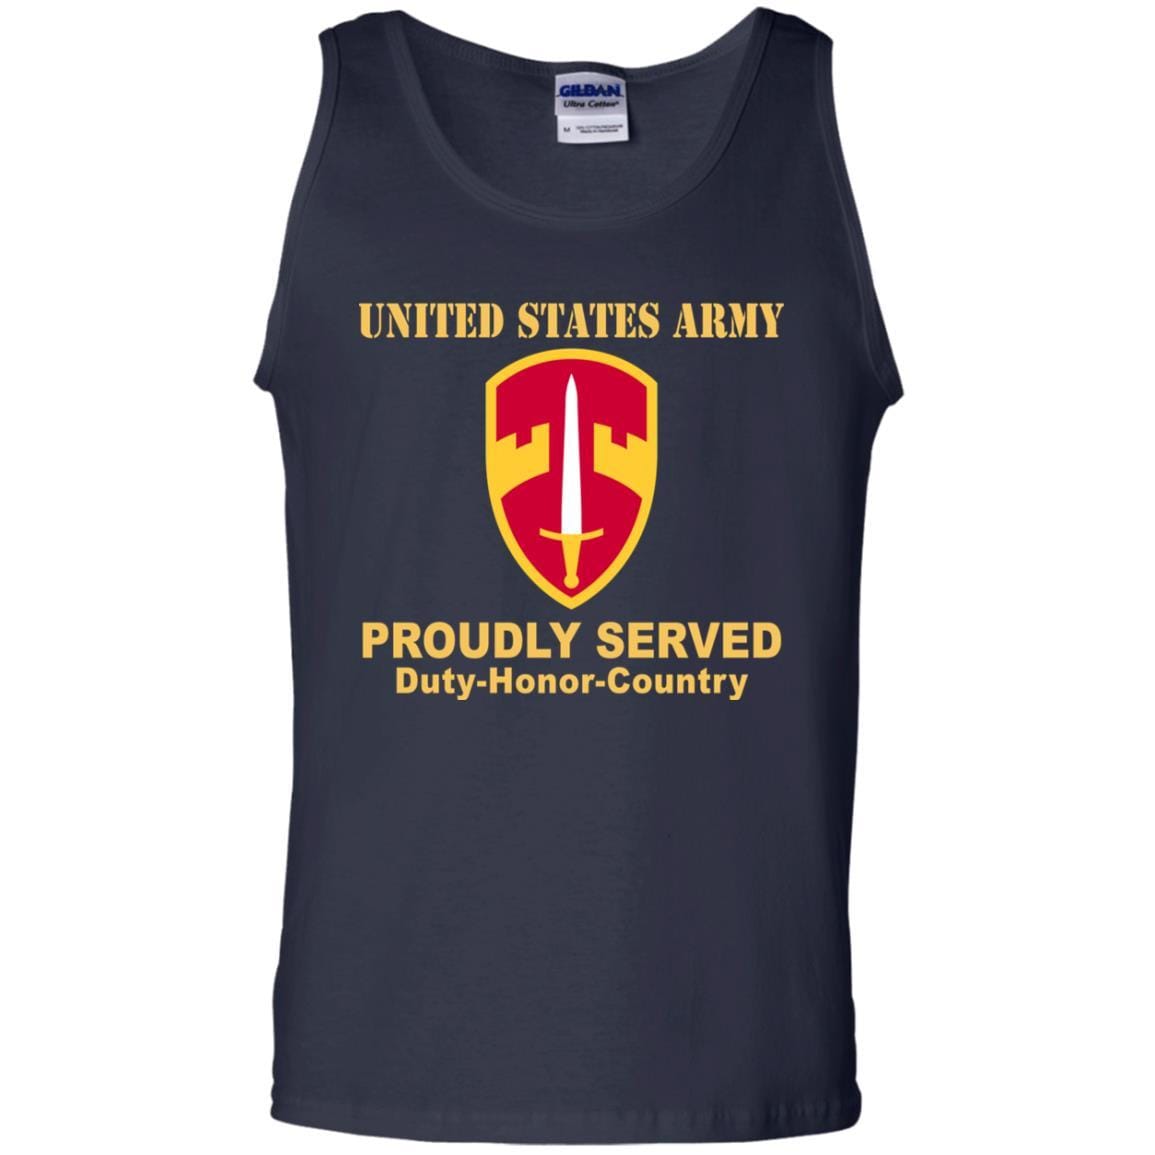 US ARMY CSIB U.S. ARMY VIETNAM- Proudly Served T-Shirt On Front For Men-TShirt-Army-Veterans Nation